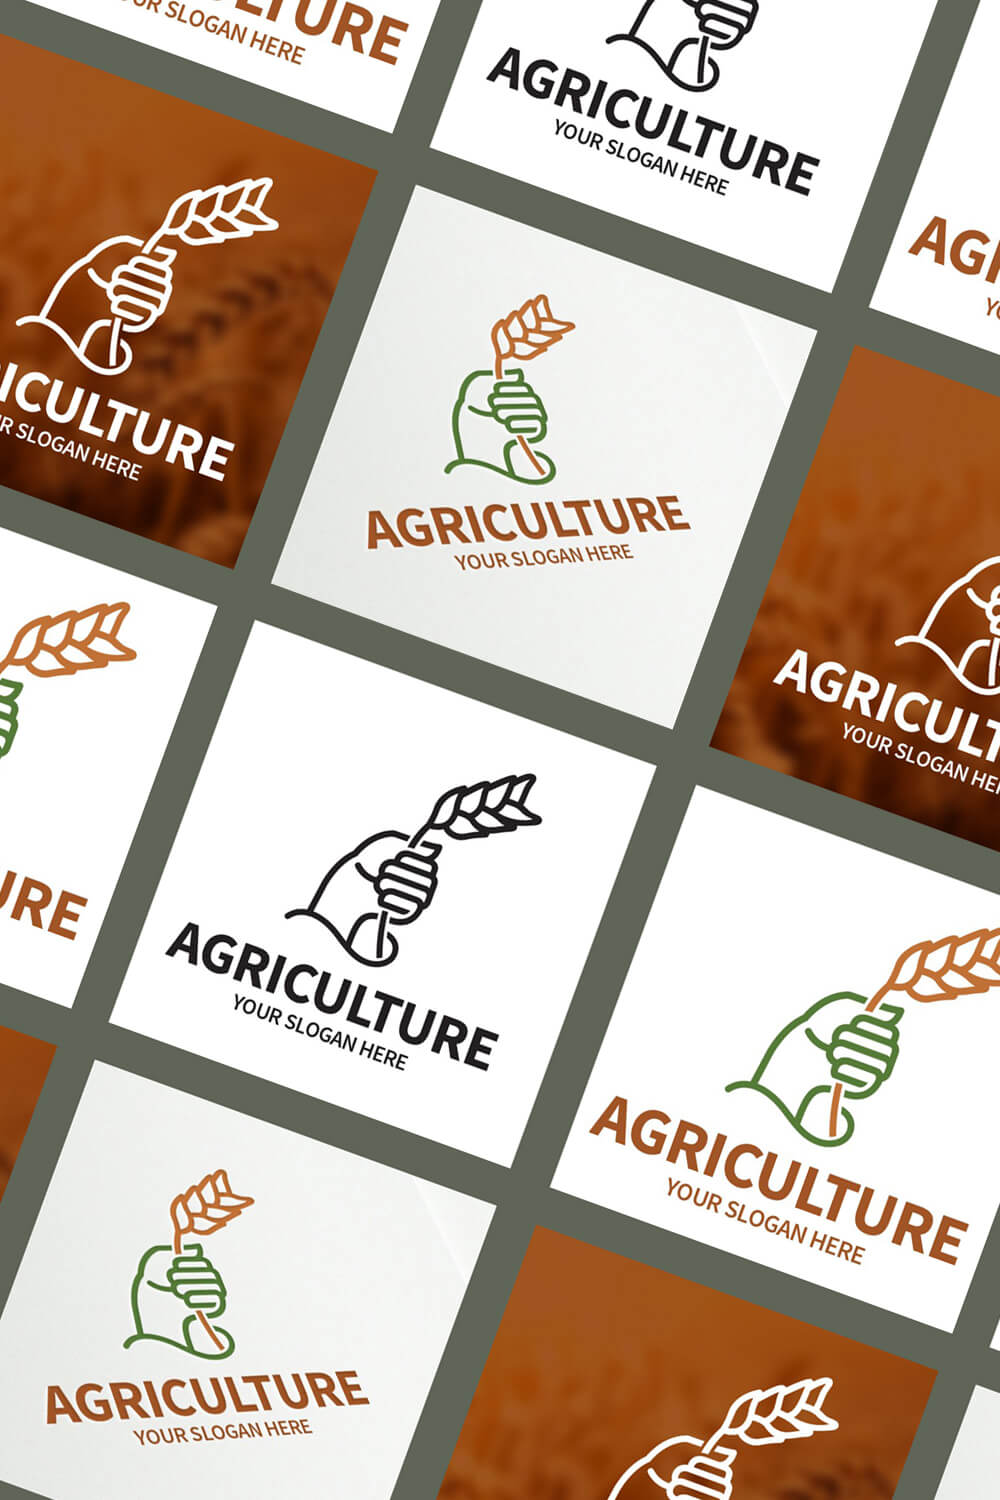 Square colored agricultural logos placed at an angle.